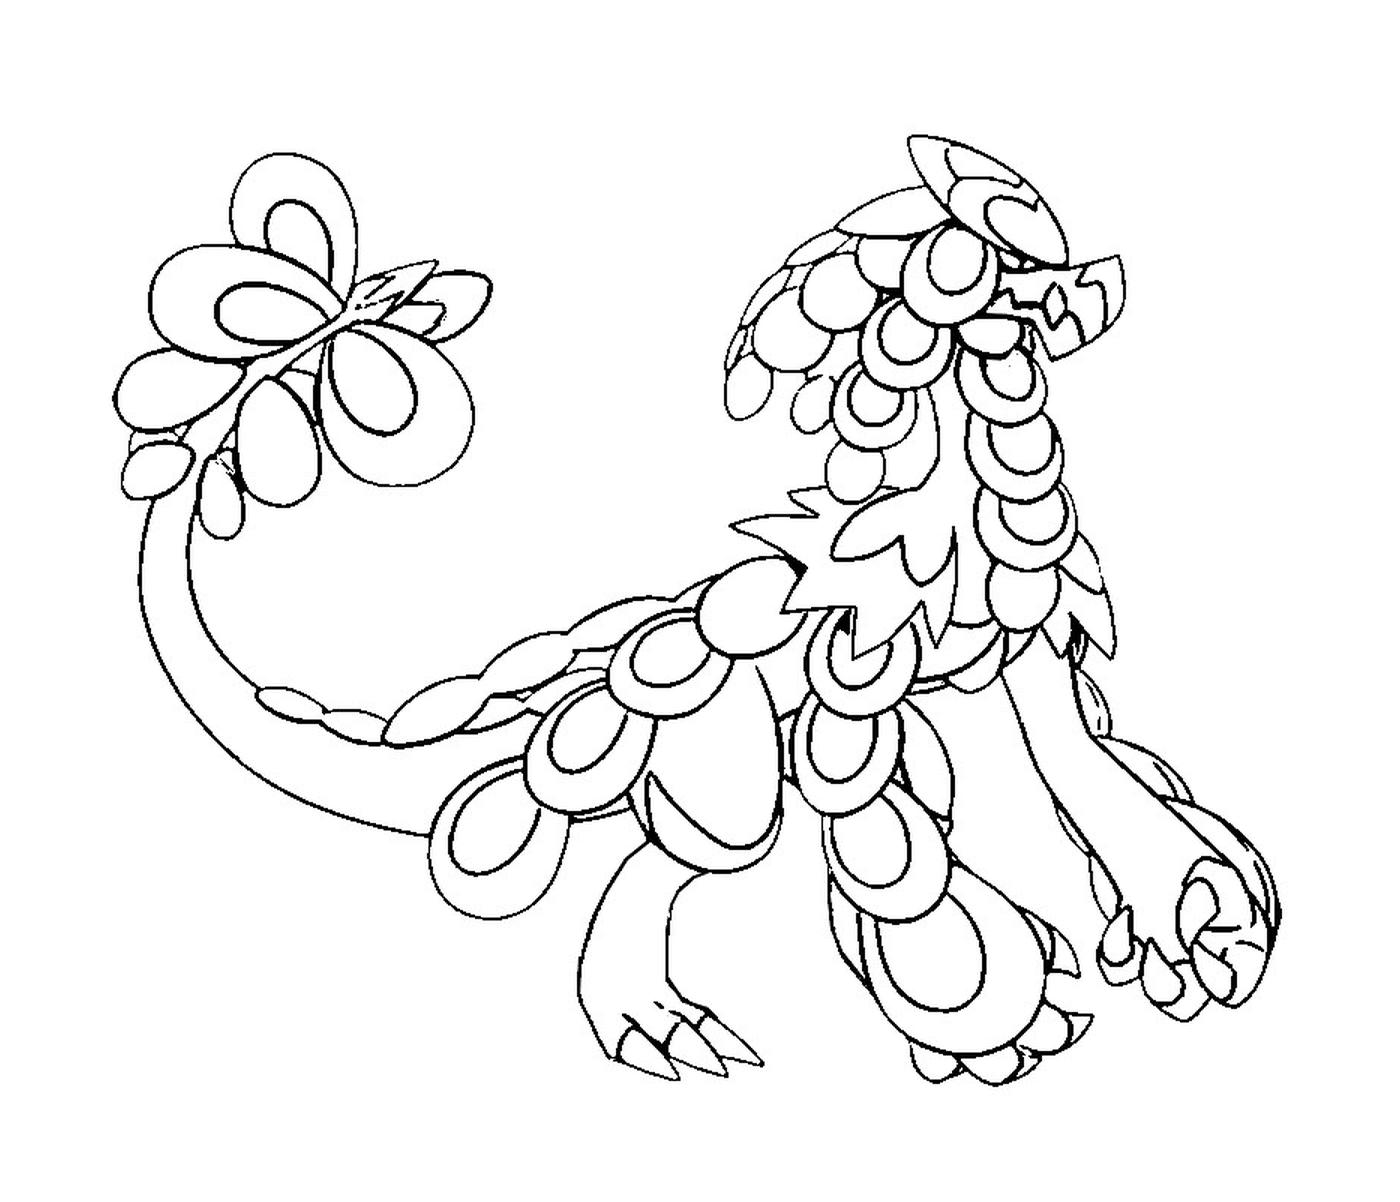  Ekaiser, a dragon with a flower on his tail 